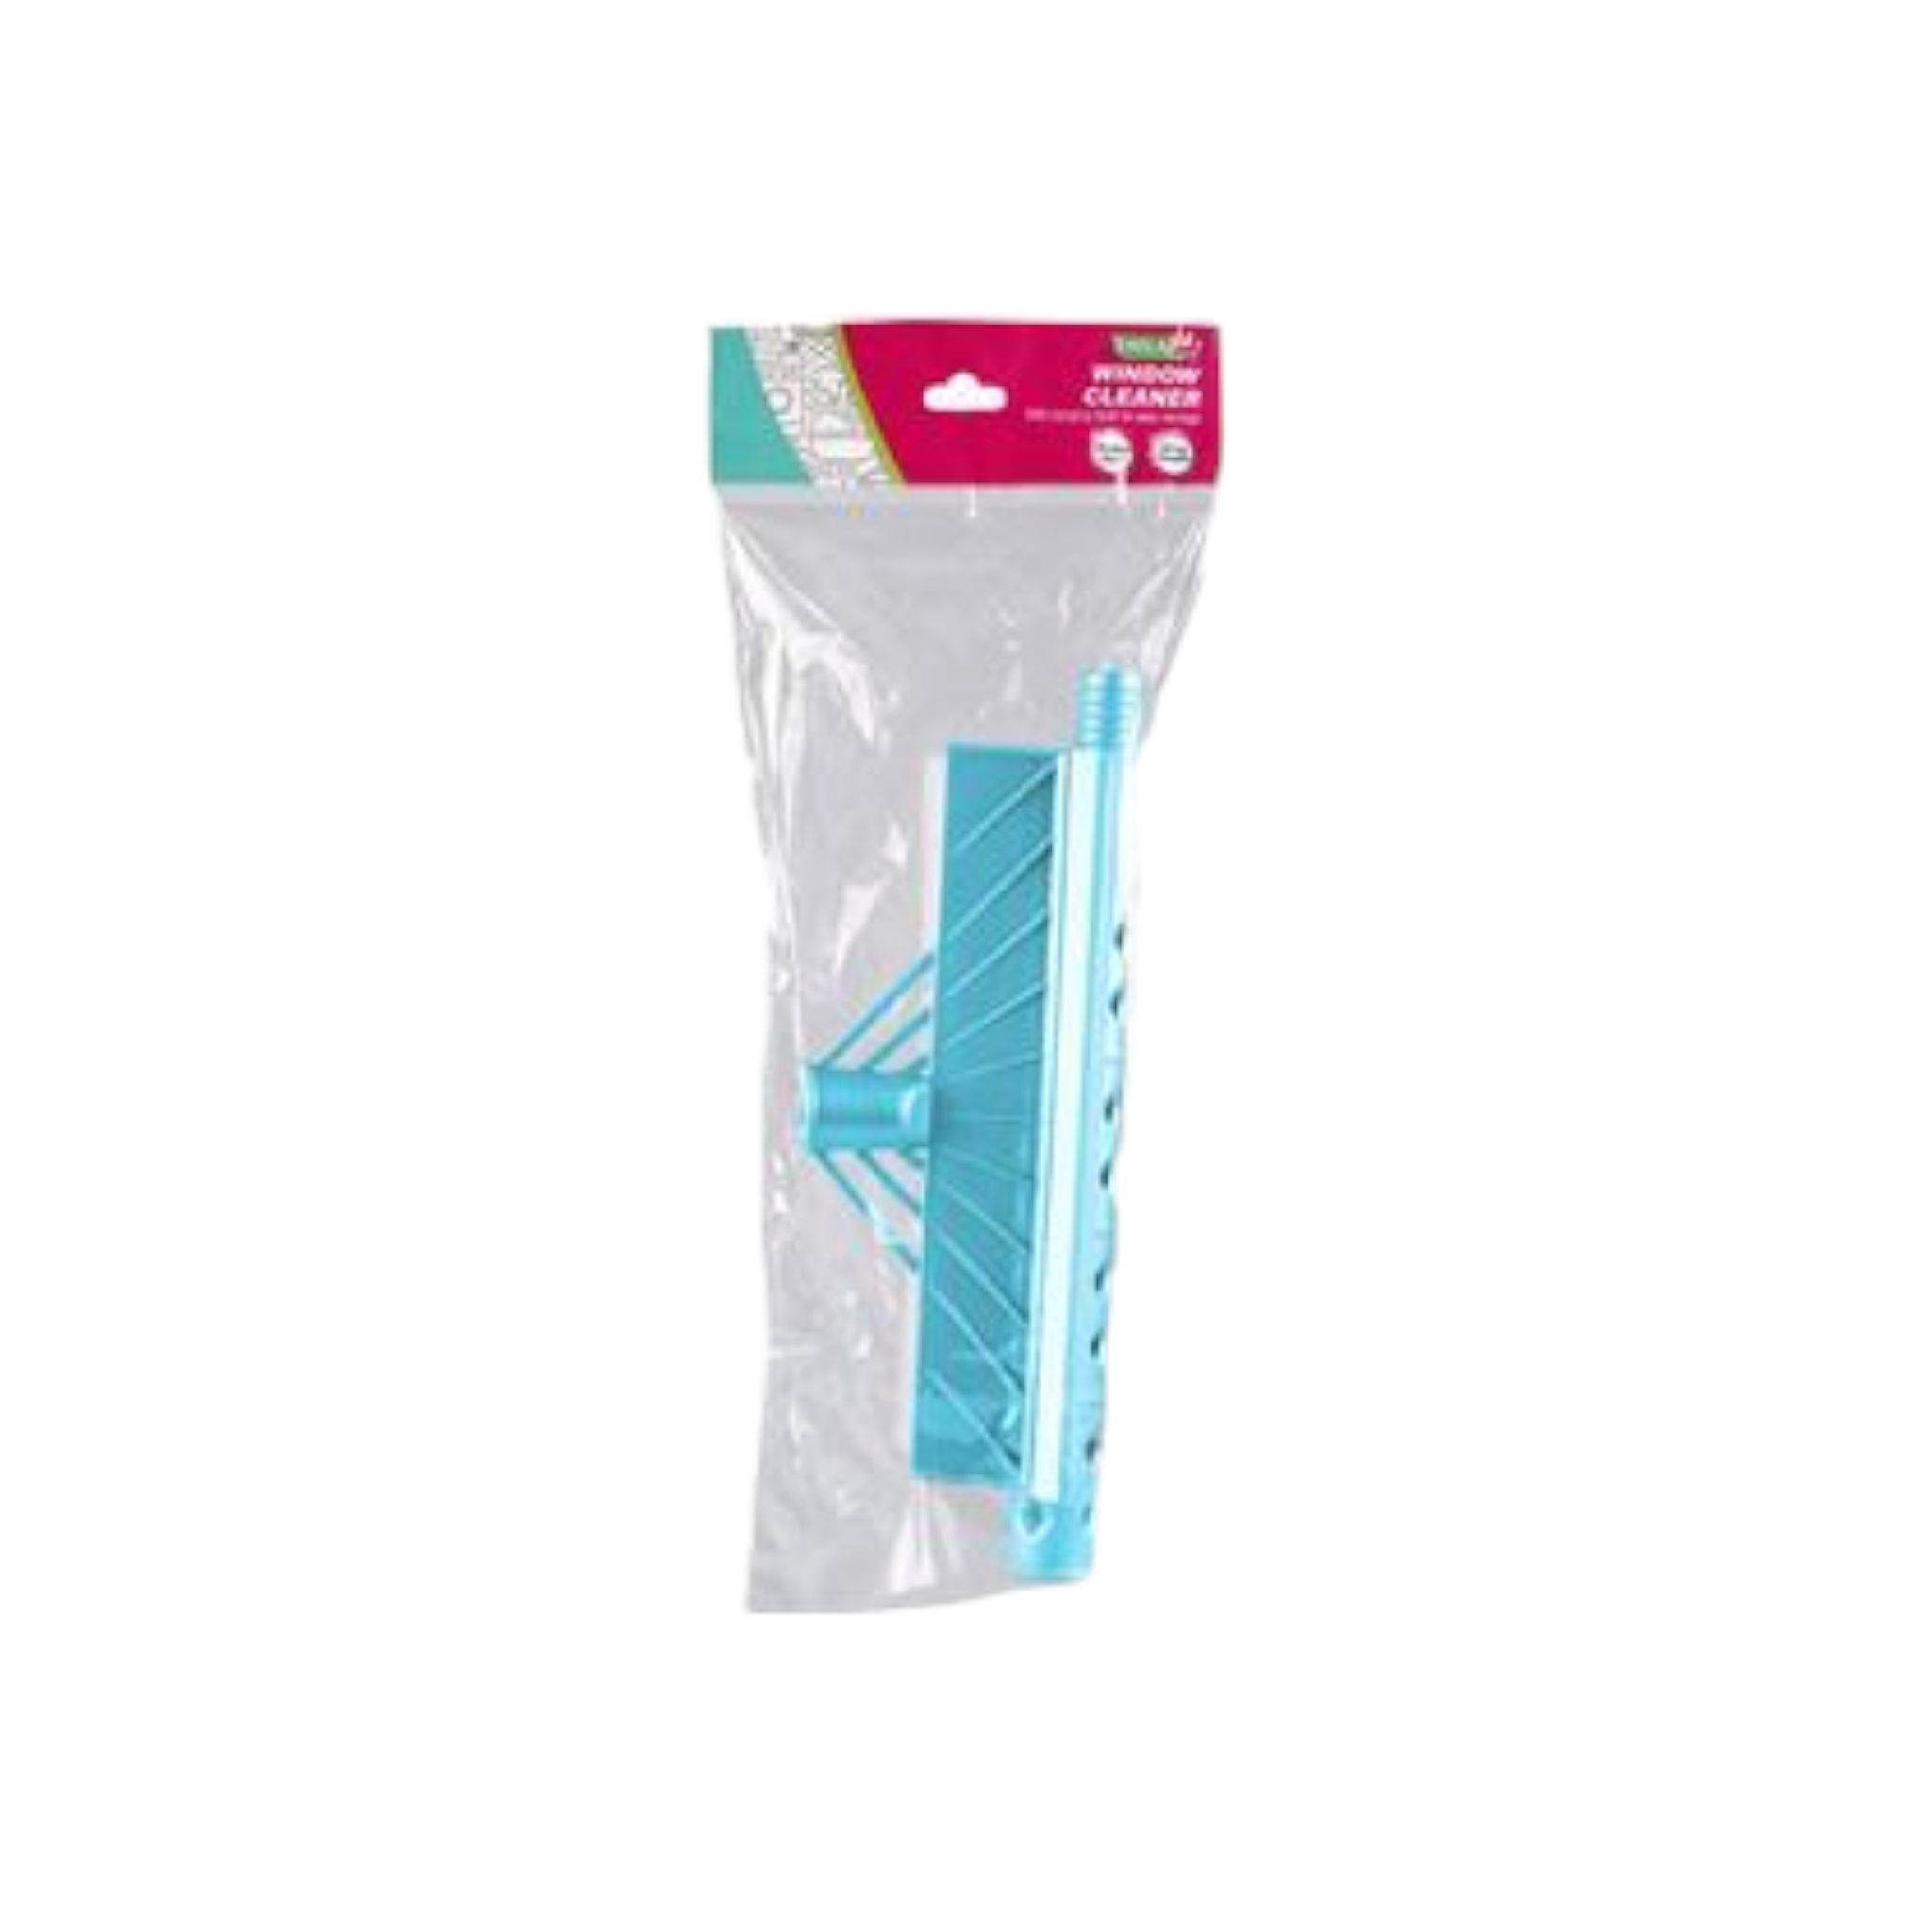 Disa Window Cleaner Sponge and Rubber 27cm